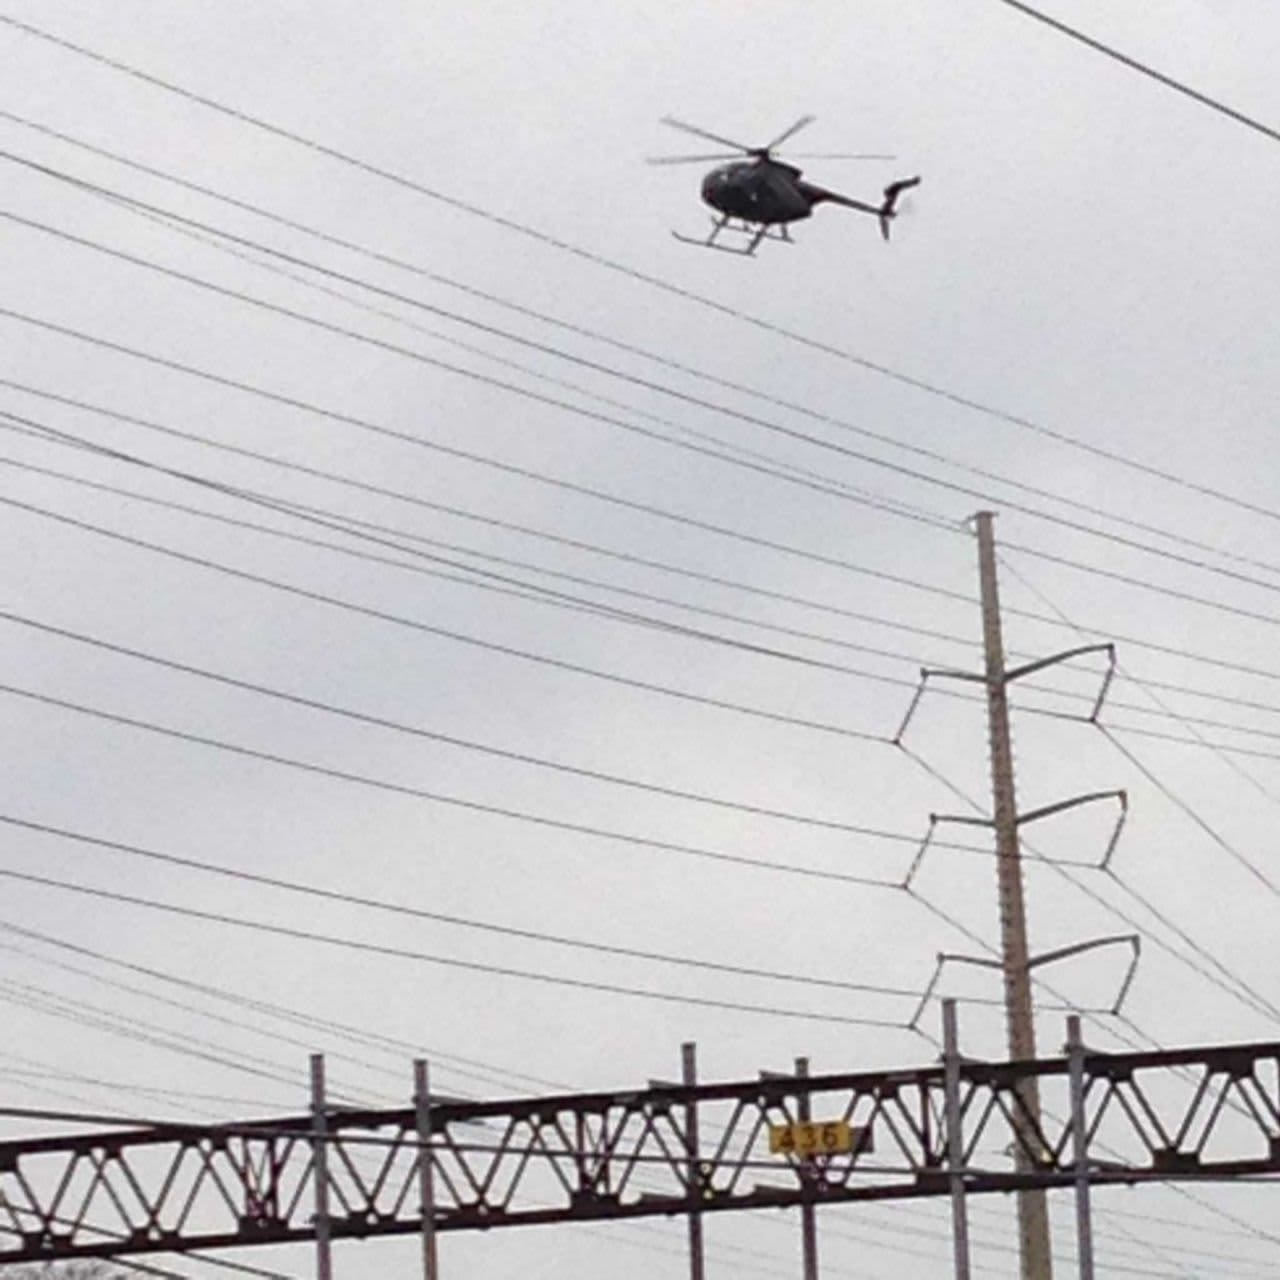 Eversource will use a helicopter to survey transmission lines this week.